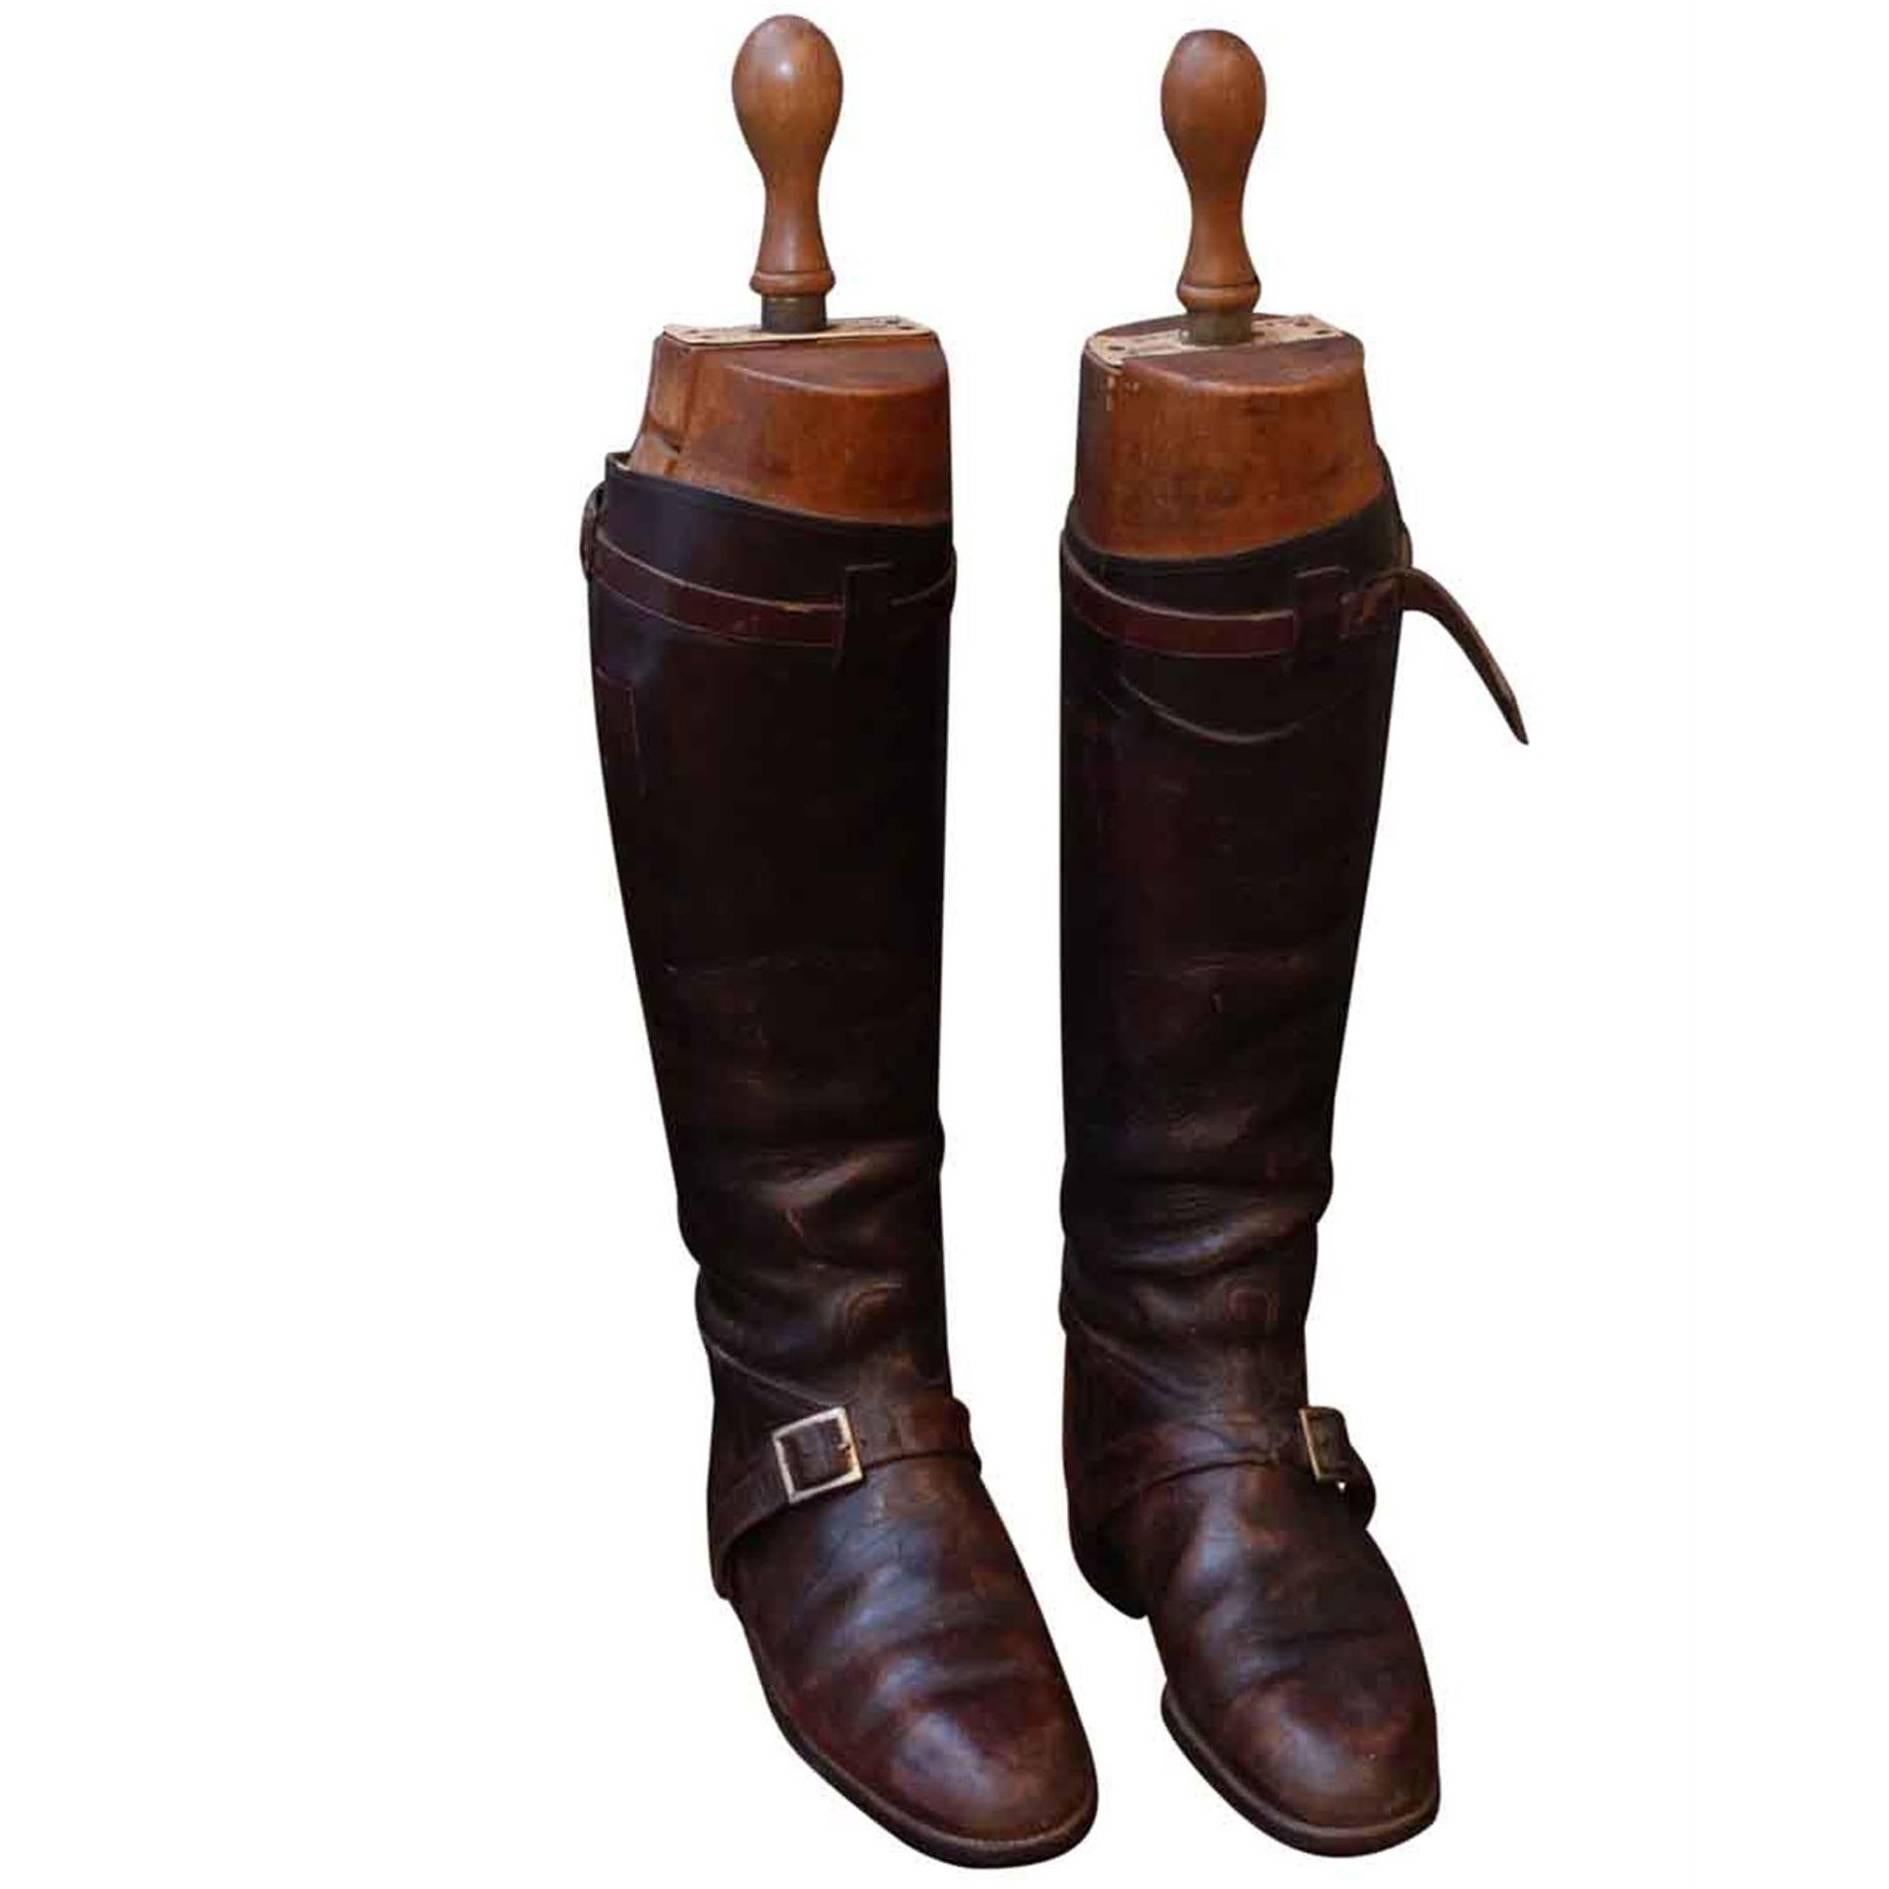 1950s Pair of English Polo Boots with Peal & Co. Ltd. Wooden Stretchers